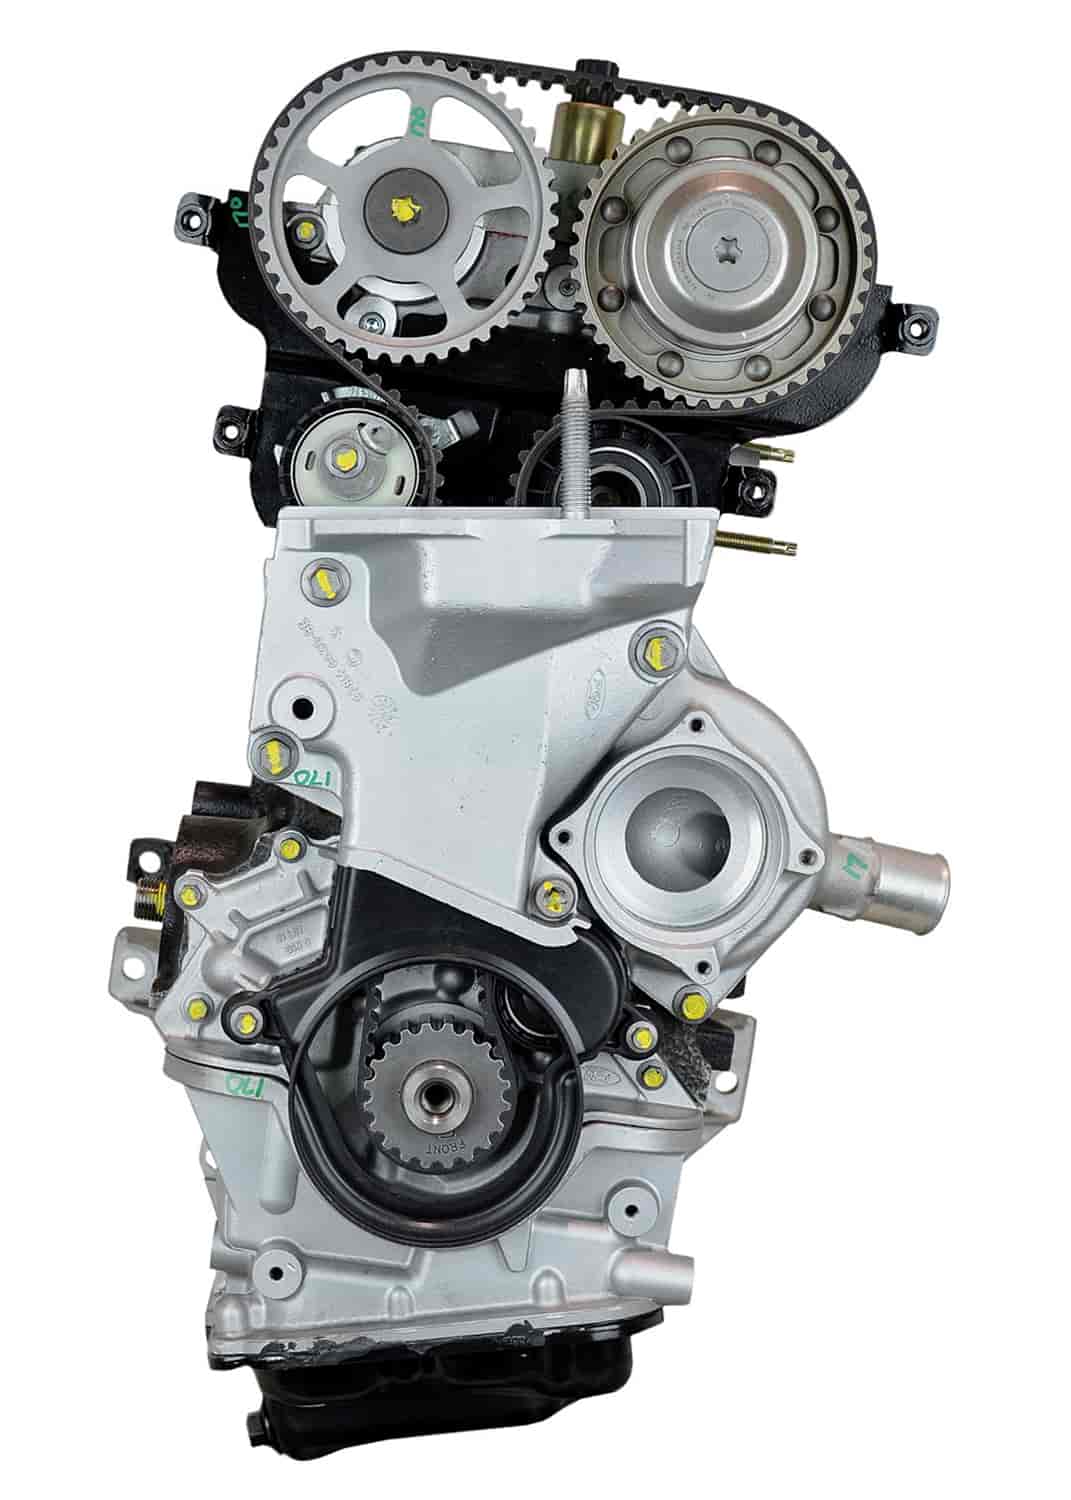 Remanufactured Crate Engine for 1999 Mercury Cougar, Mystique, & Ford Contour with 2.0L L4